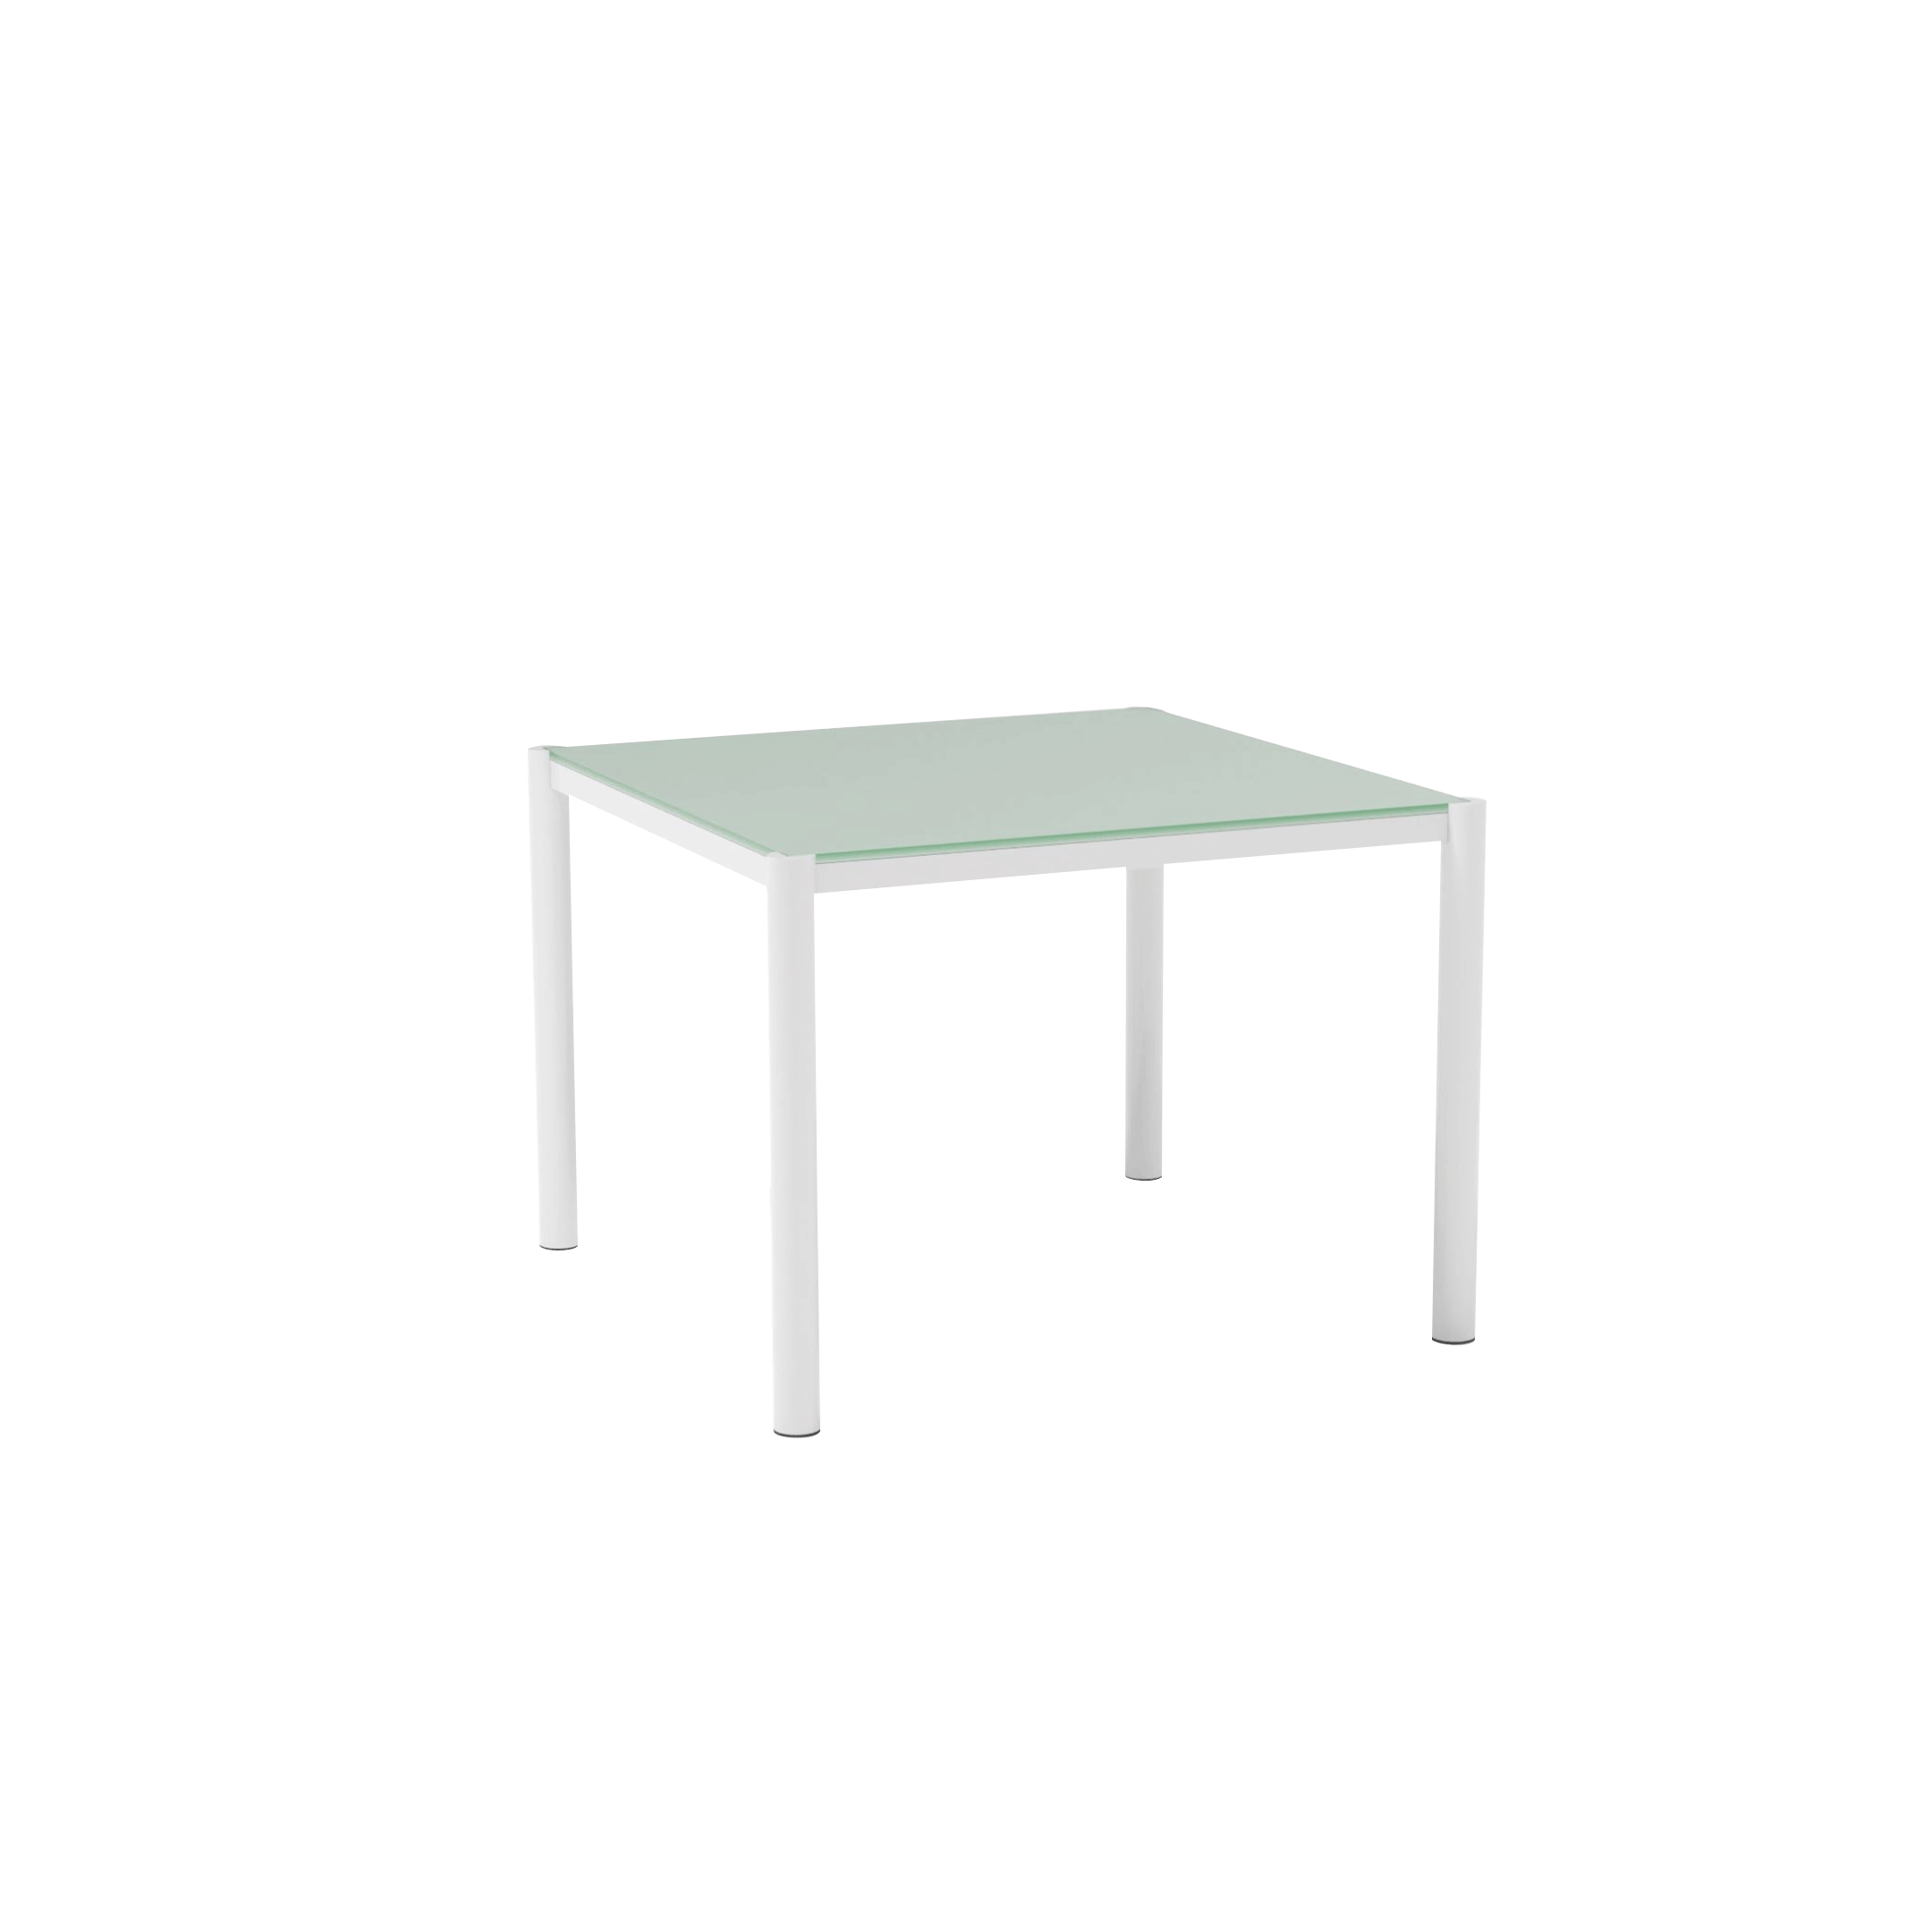 Get-Together Dining Table 38"